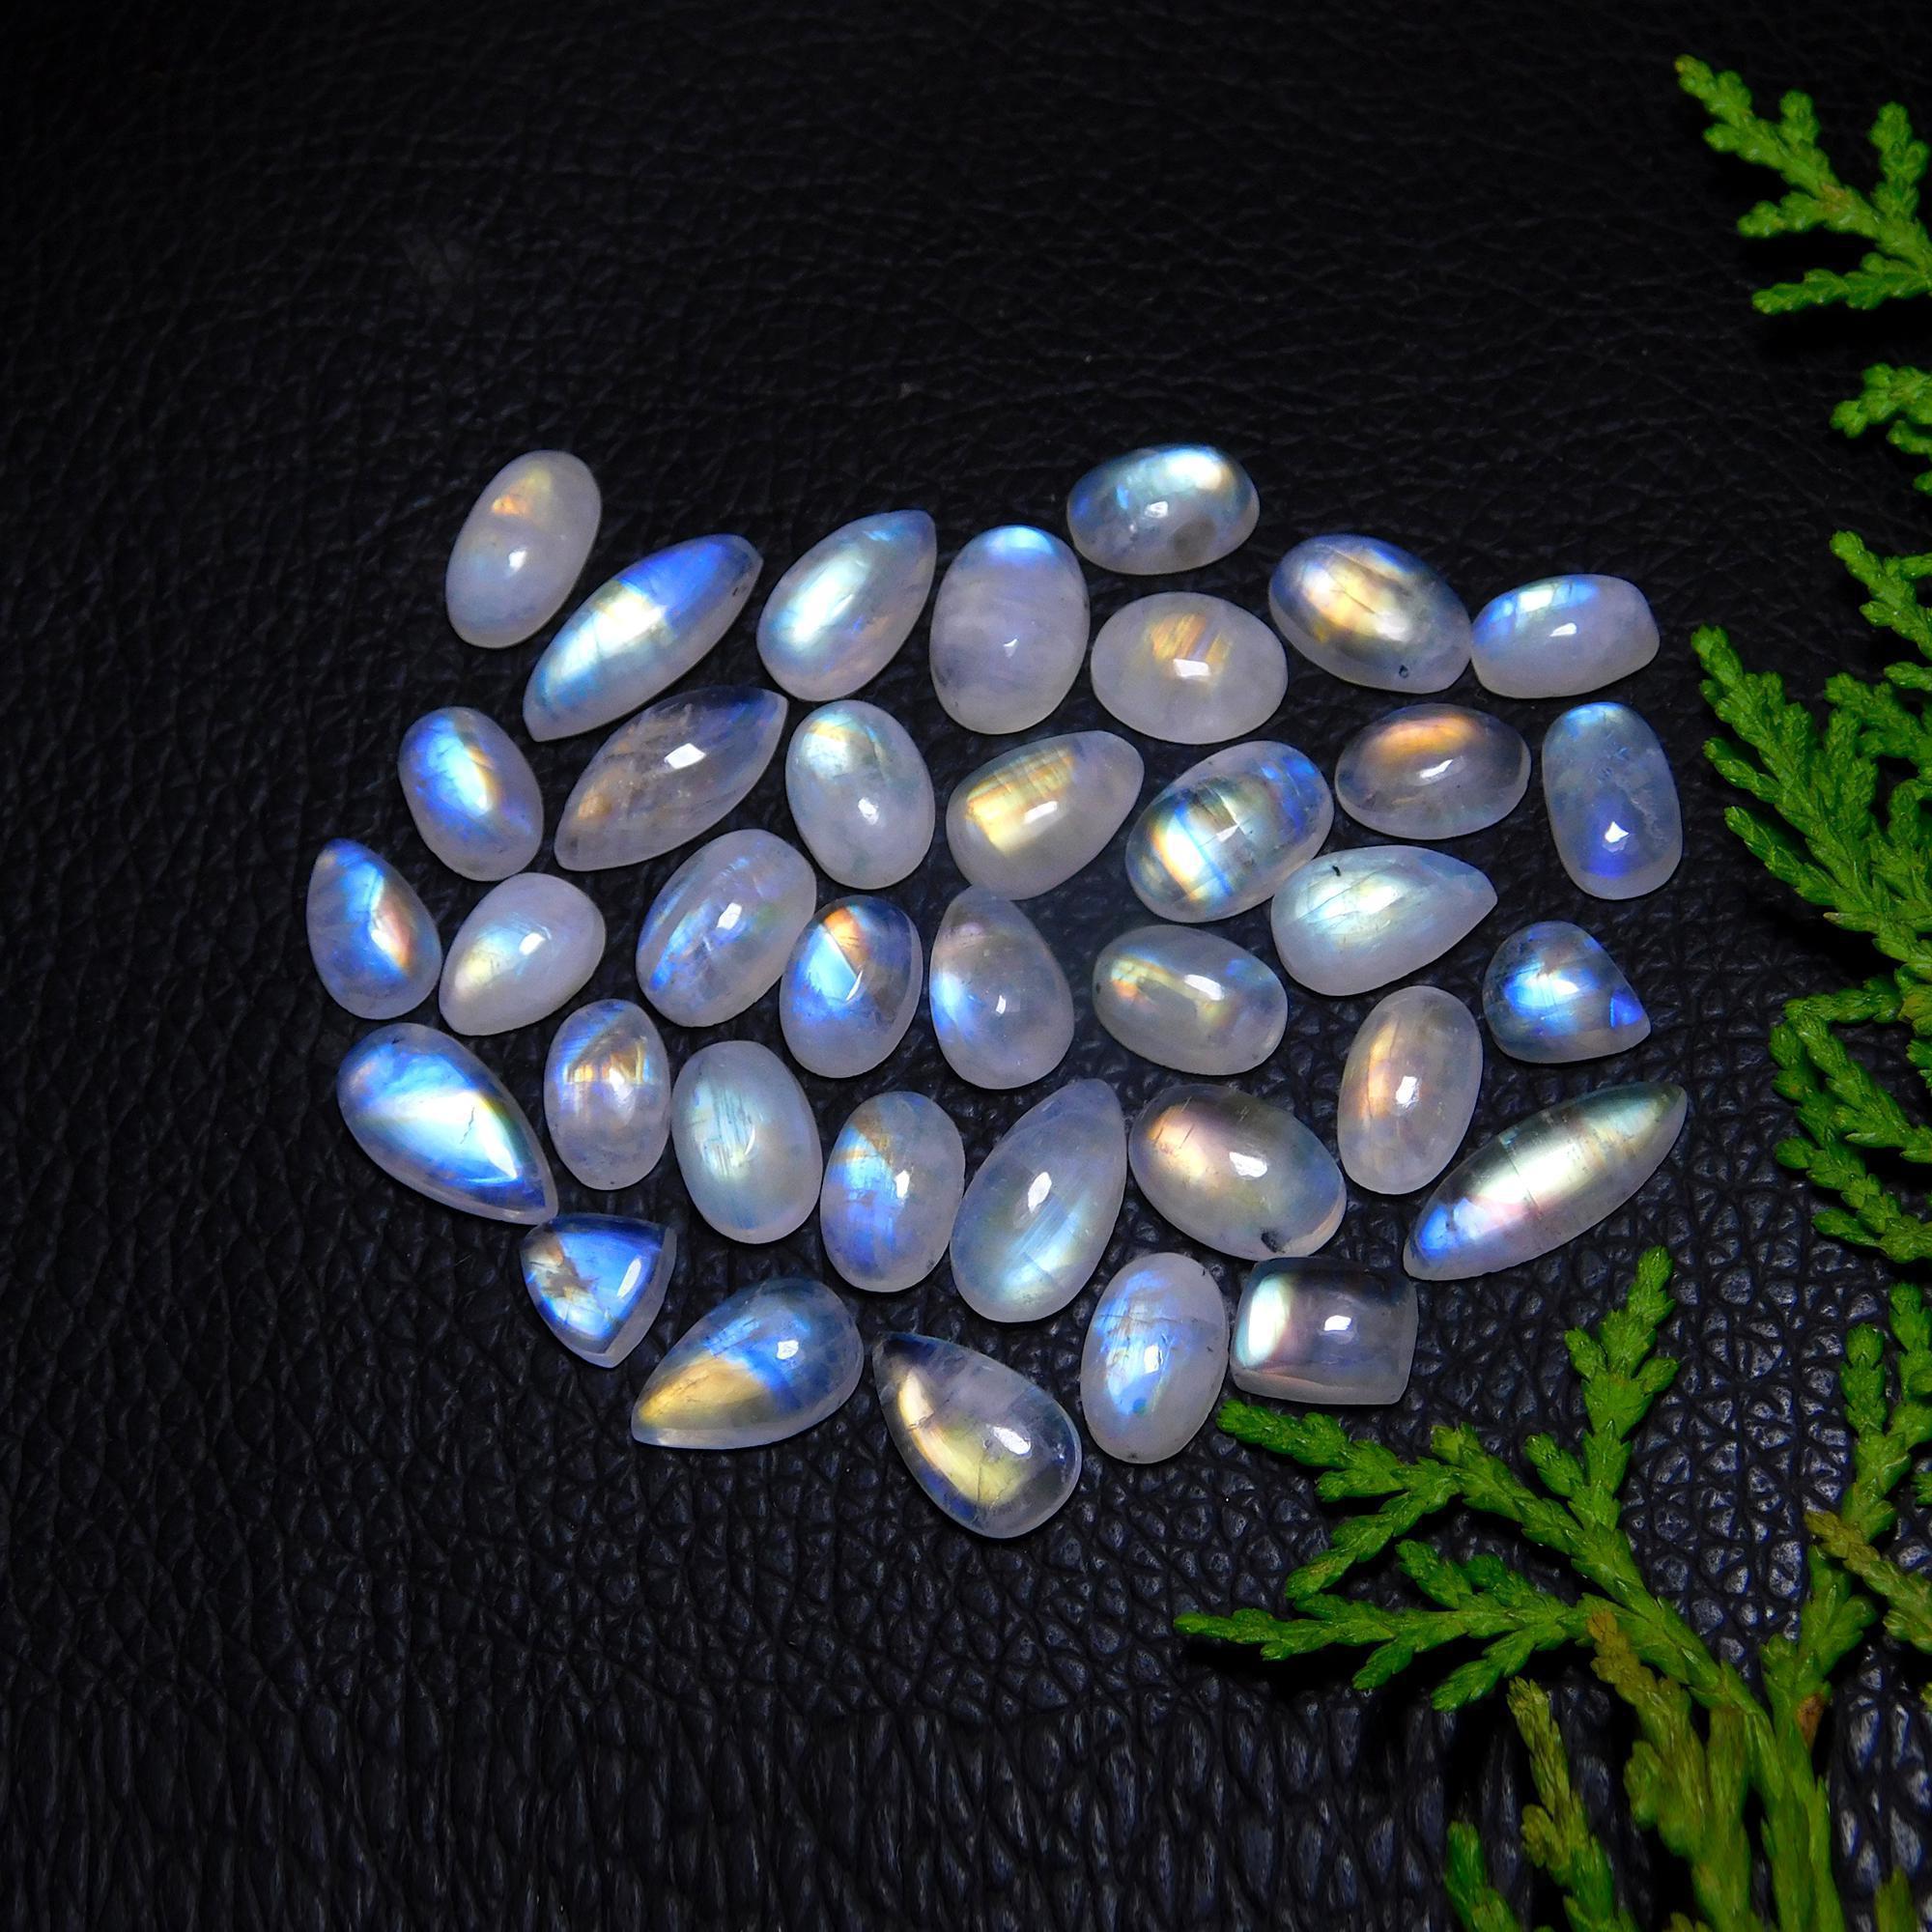 36Pcs 73Cts Natural Rainbow Moonstone Cabochon Blue Fire Loose Gemstone Crystal jewelry supplies wholesale lot gift for her Black Friday 14X5 7X5mm#9427